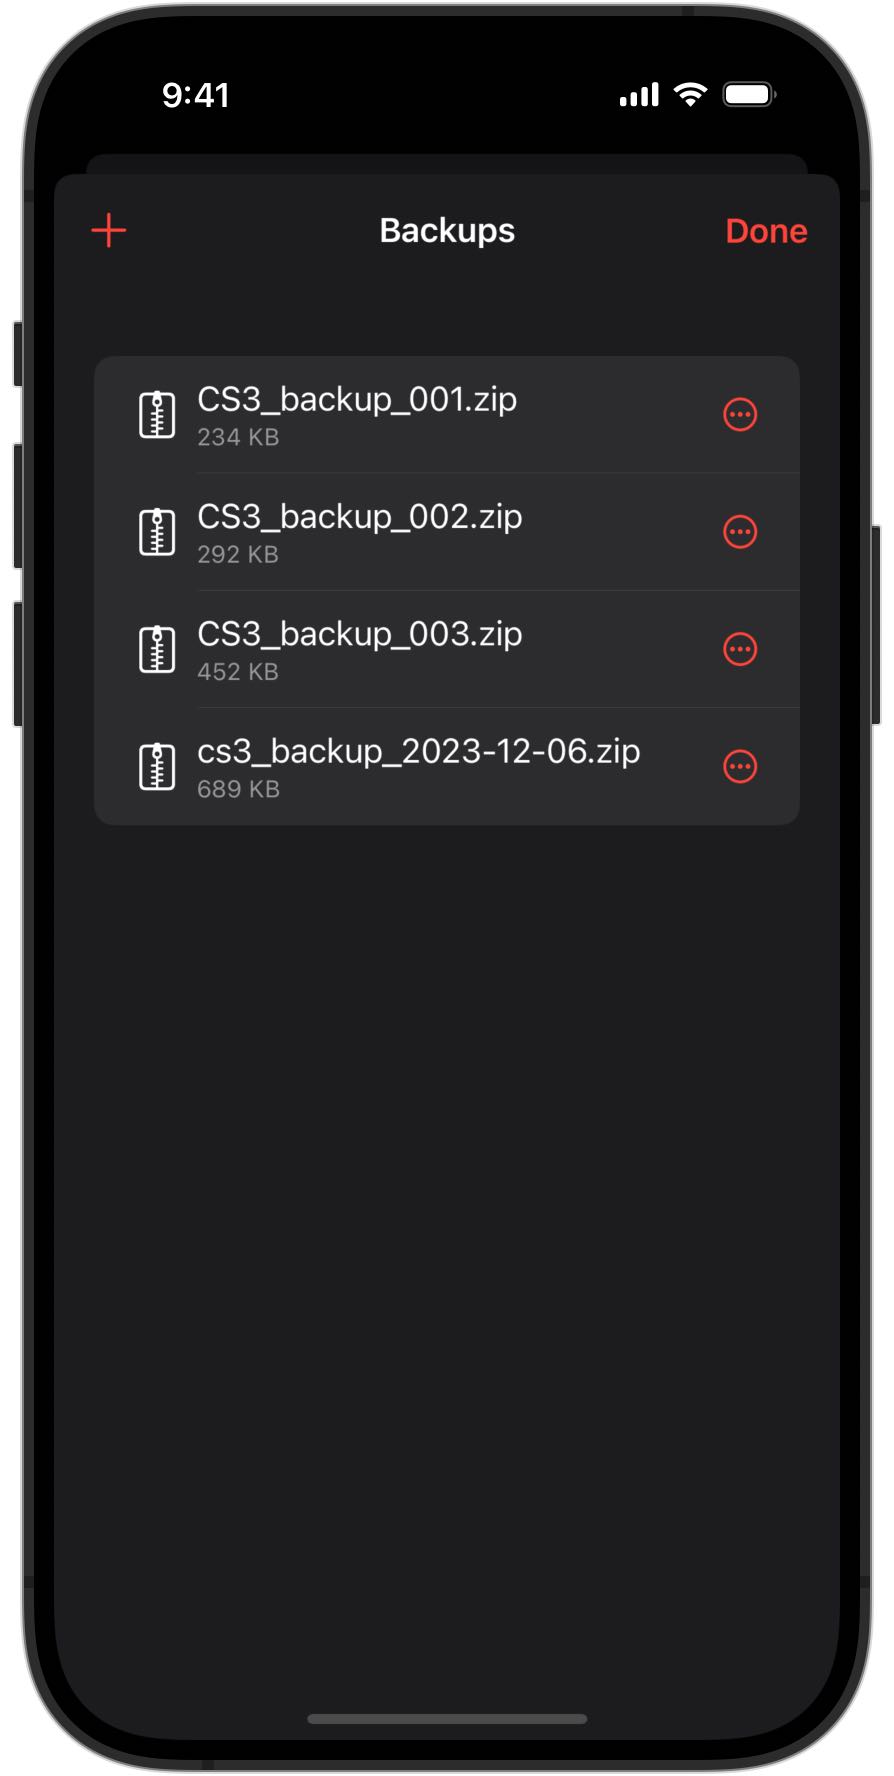 Screenshots of an iPhone showing the backup overview in RailControl Pro